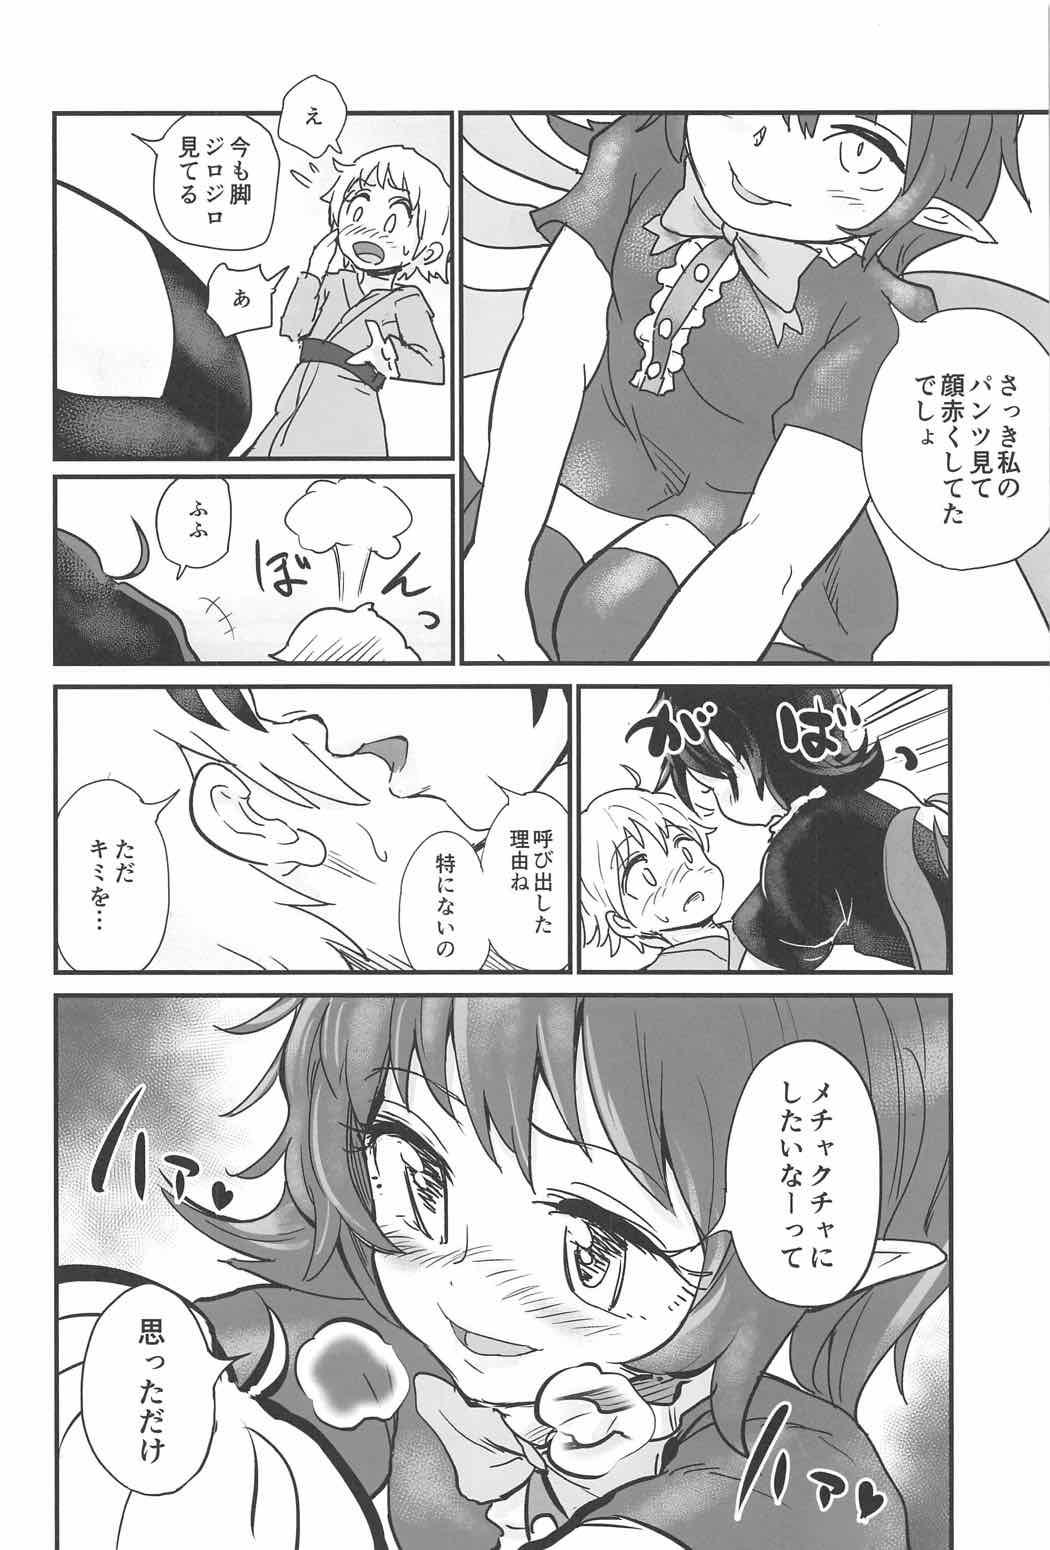 Best Blowjobs Ever Nue to Shounen - Touhou project Celebrity Sex Scene - Page 9